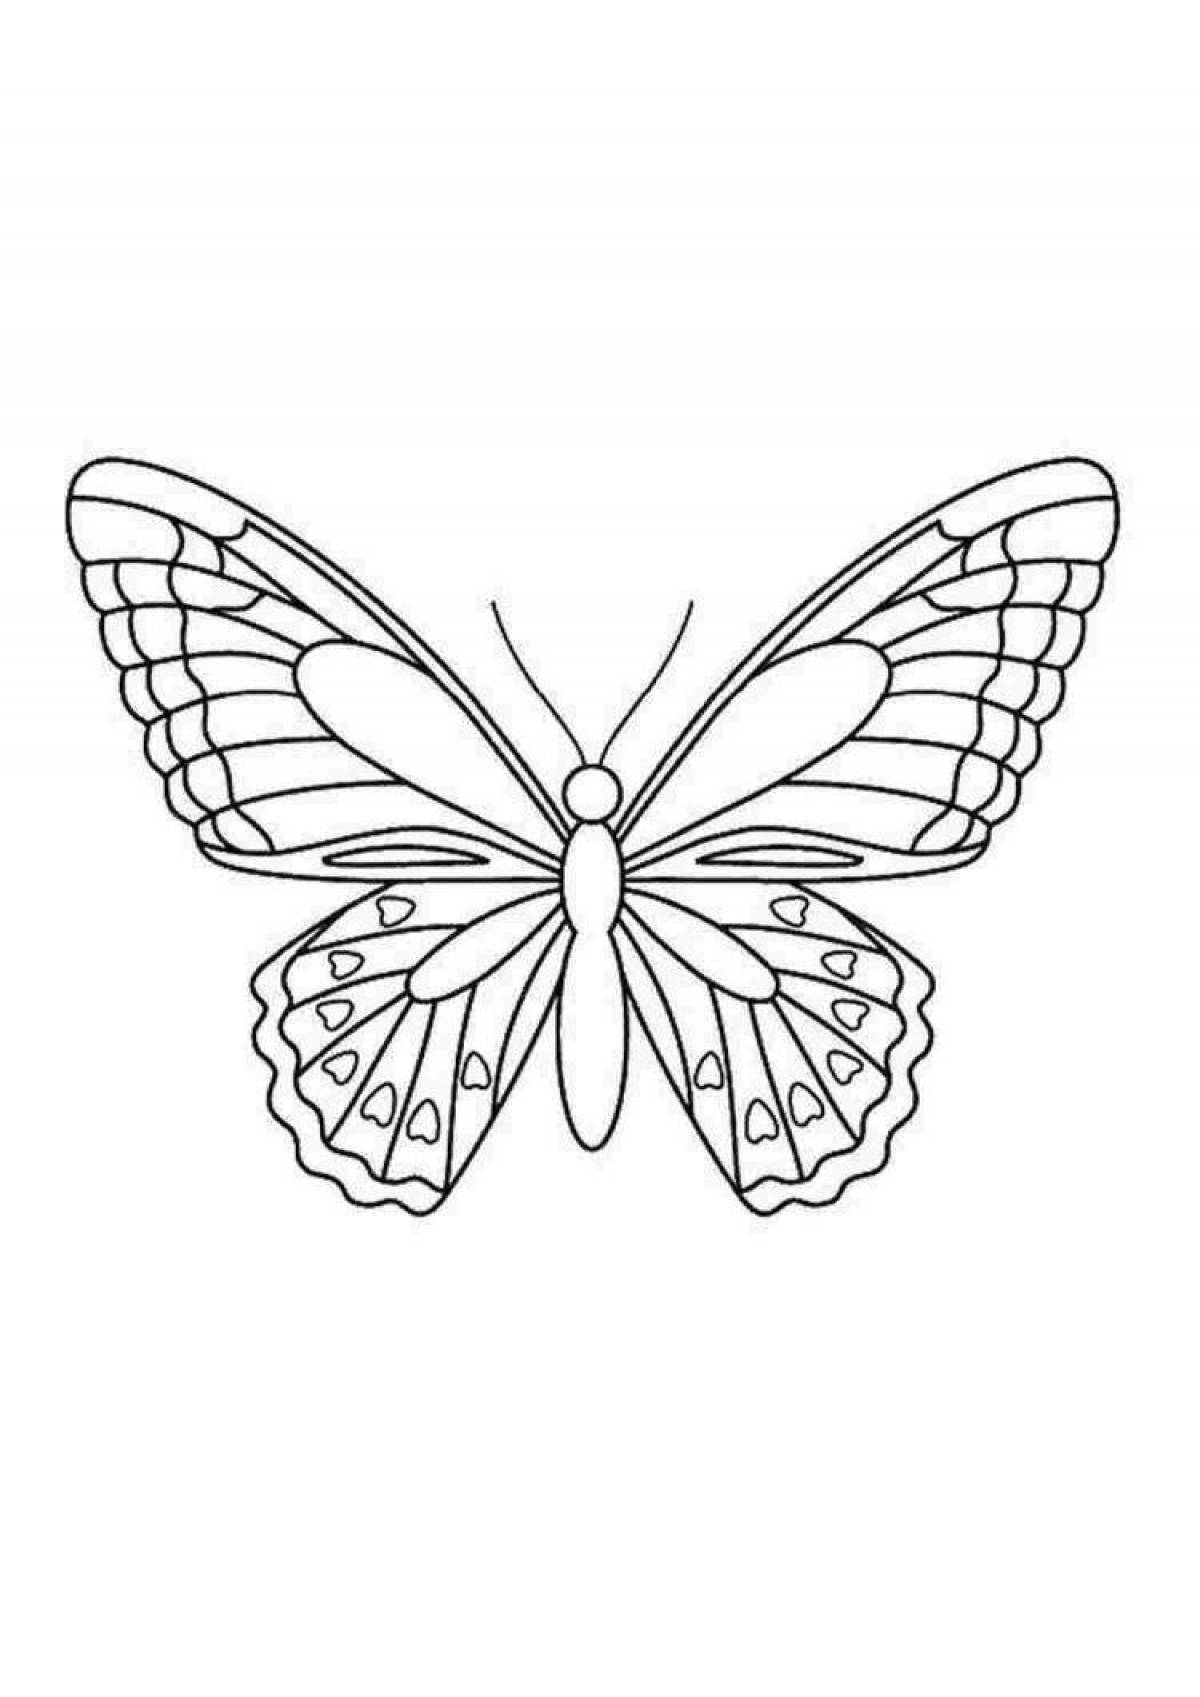 Coloring fairy butterfly stencil